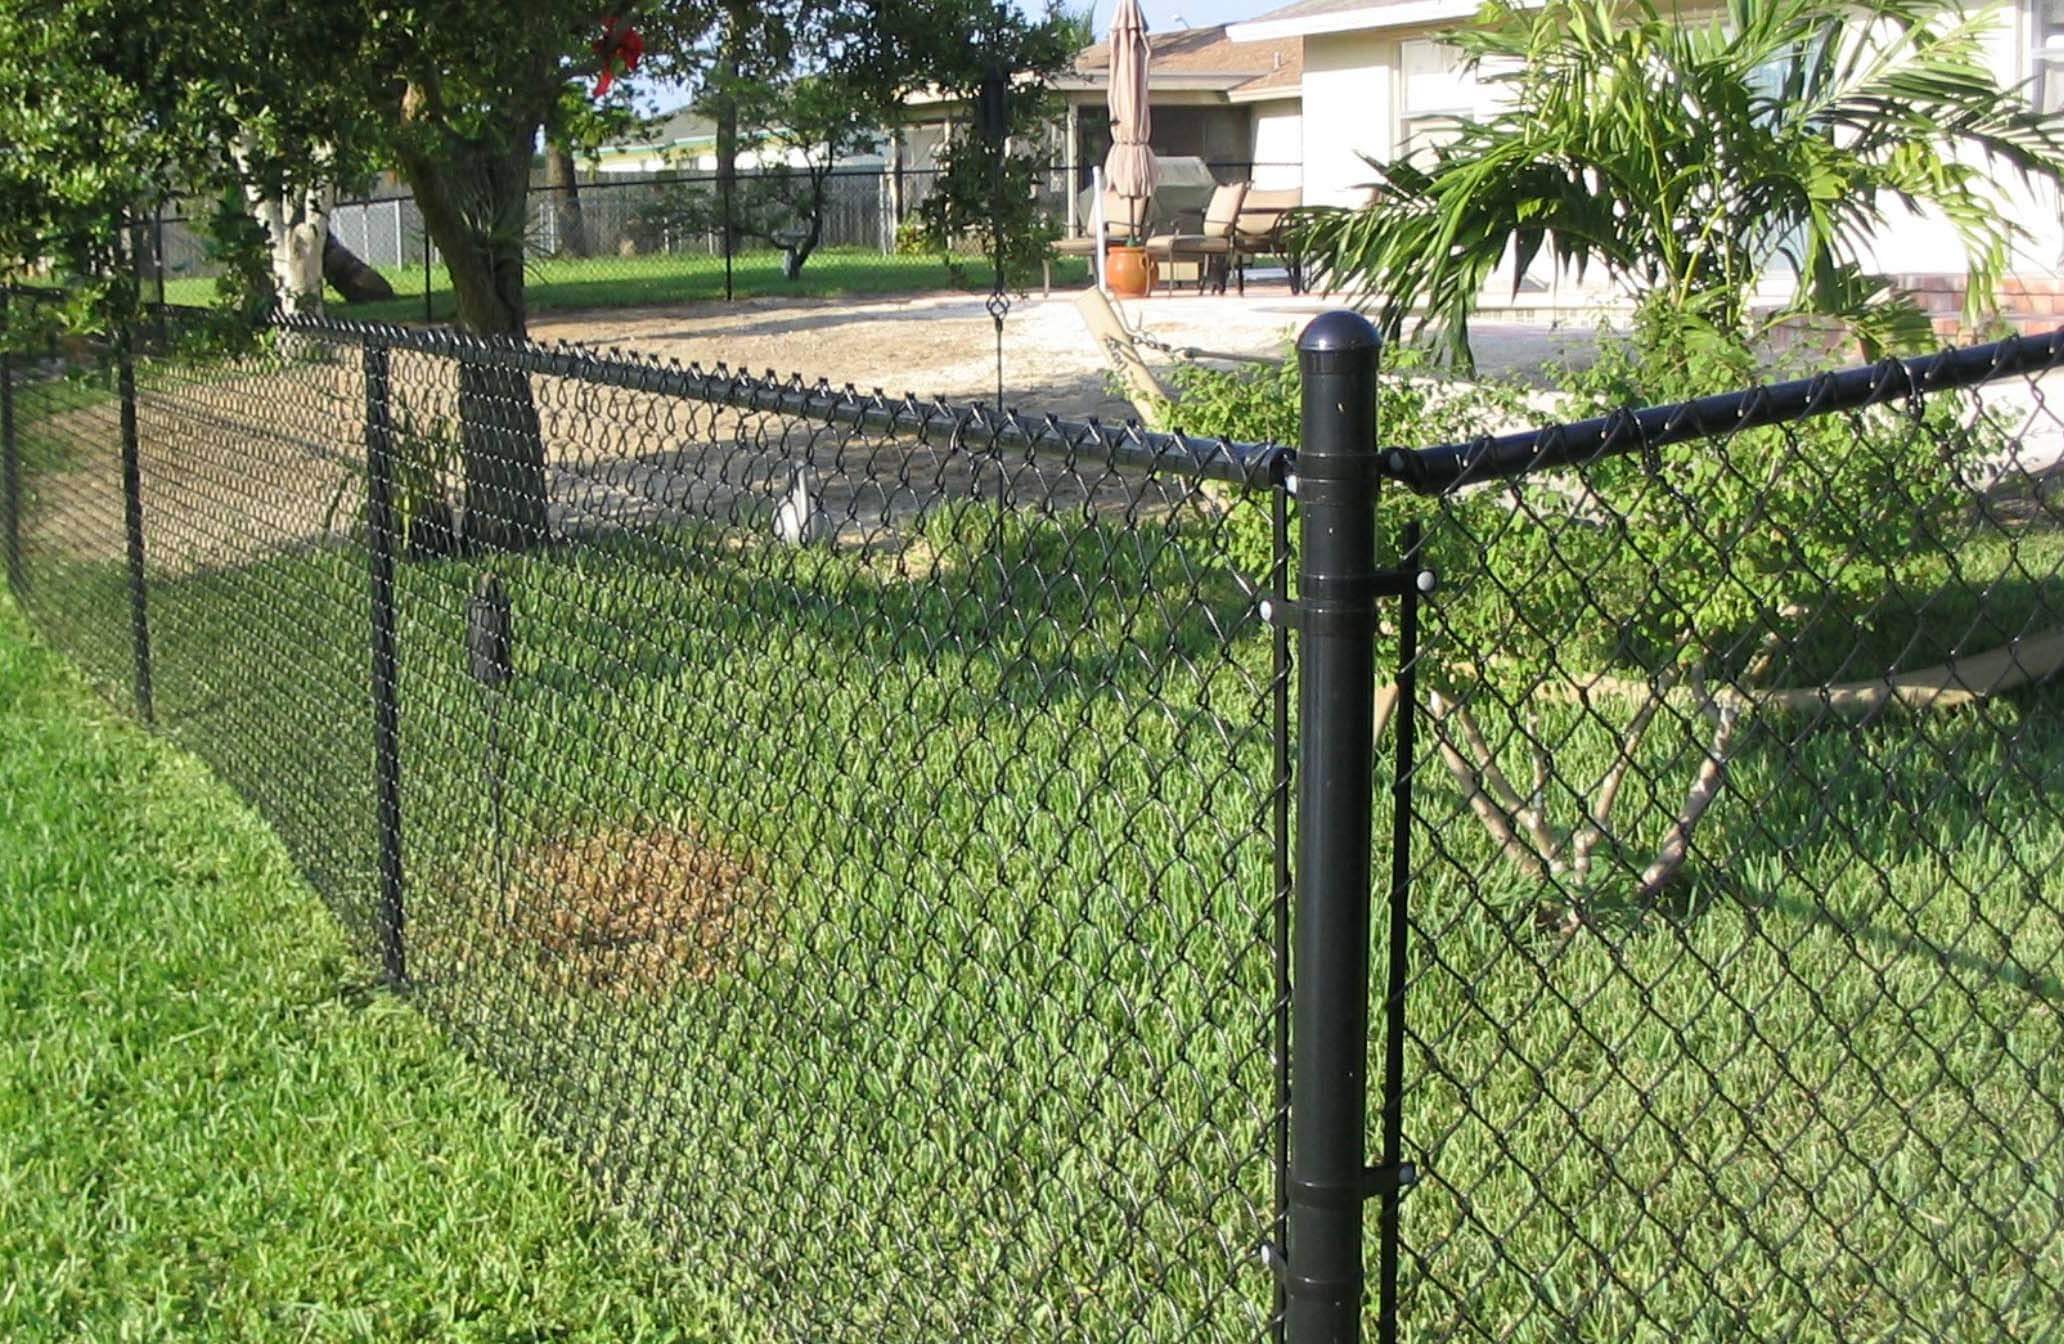 "Chain Link Wire: Finding the Right Gauge for Your Fencing Needs"